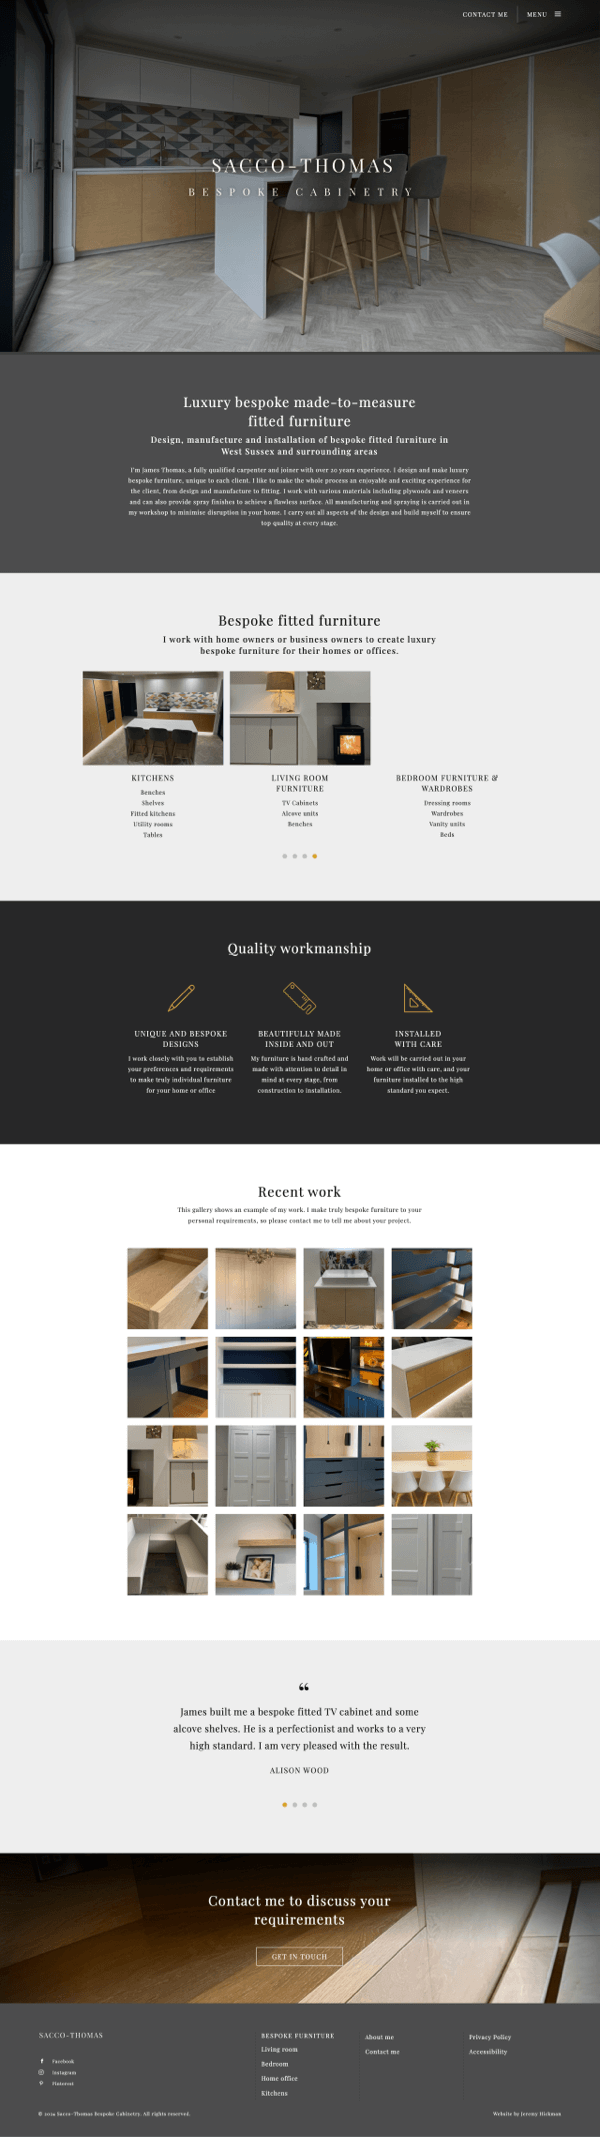 Sacco-Thomas Bespoke Cabinetry (Website simulation on a laptop)